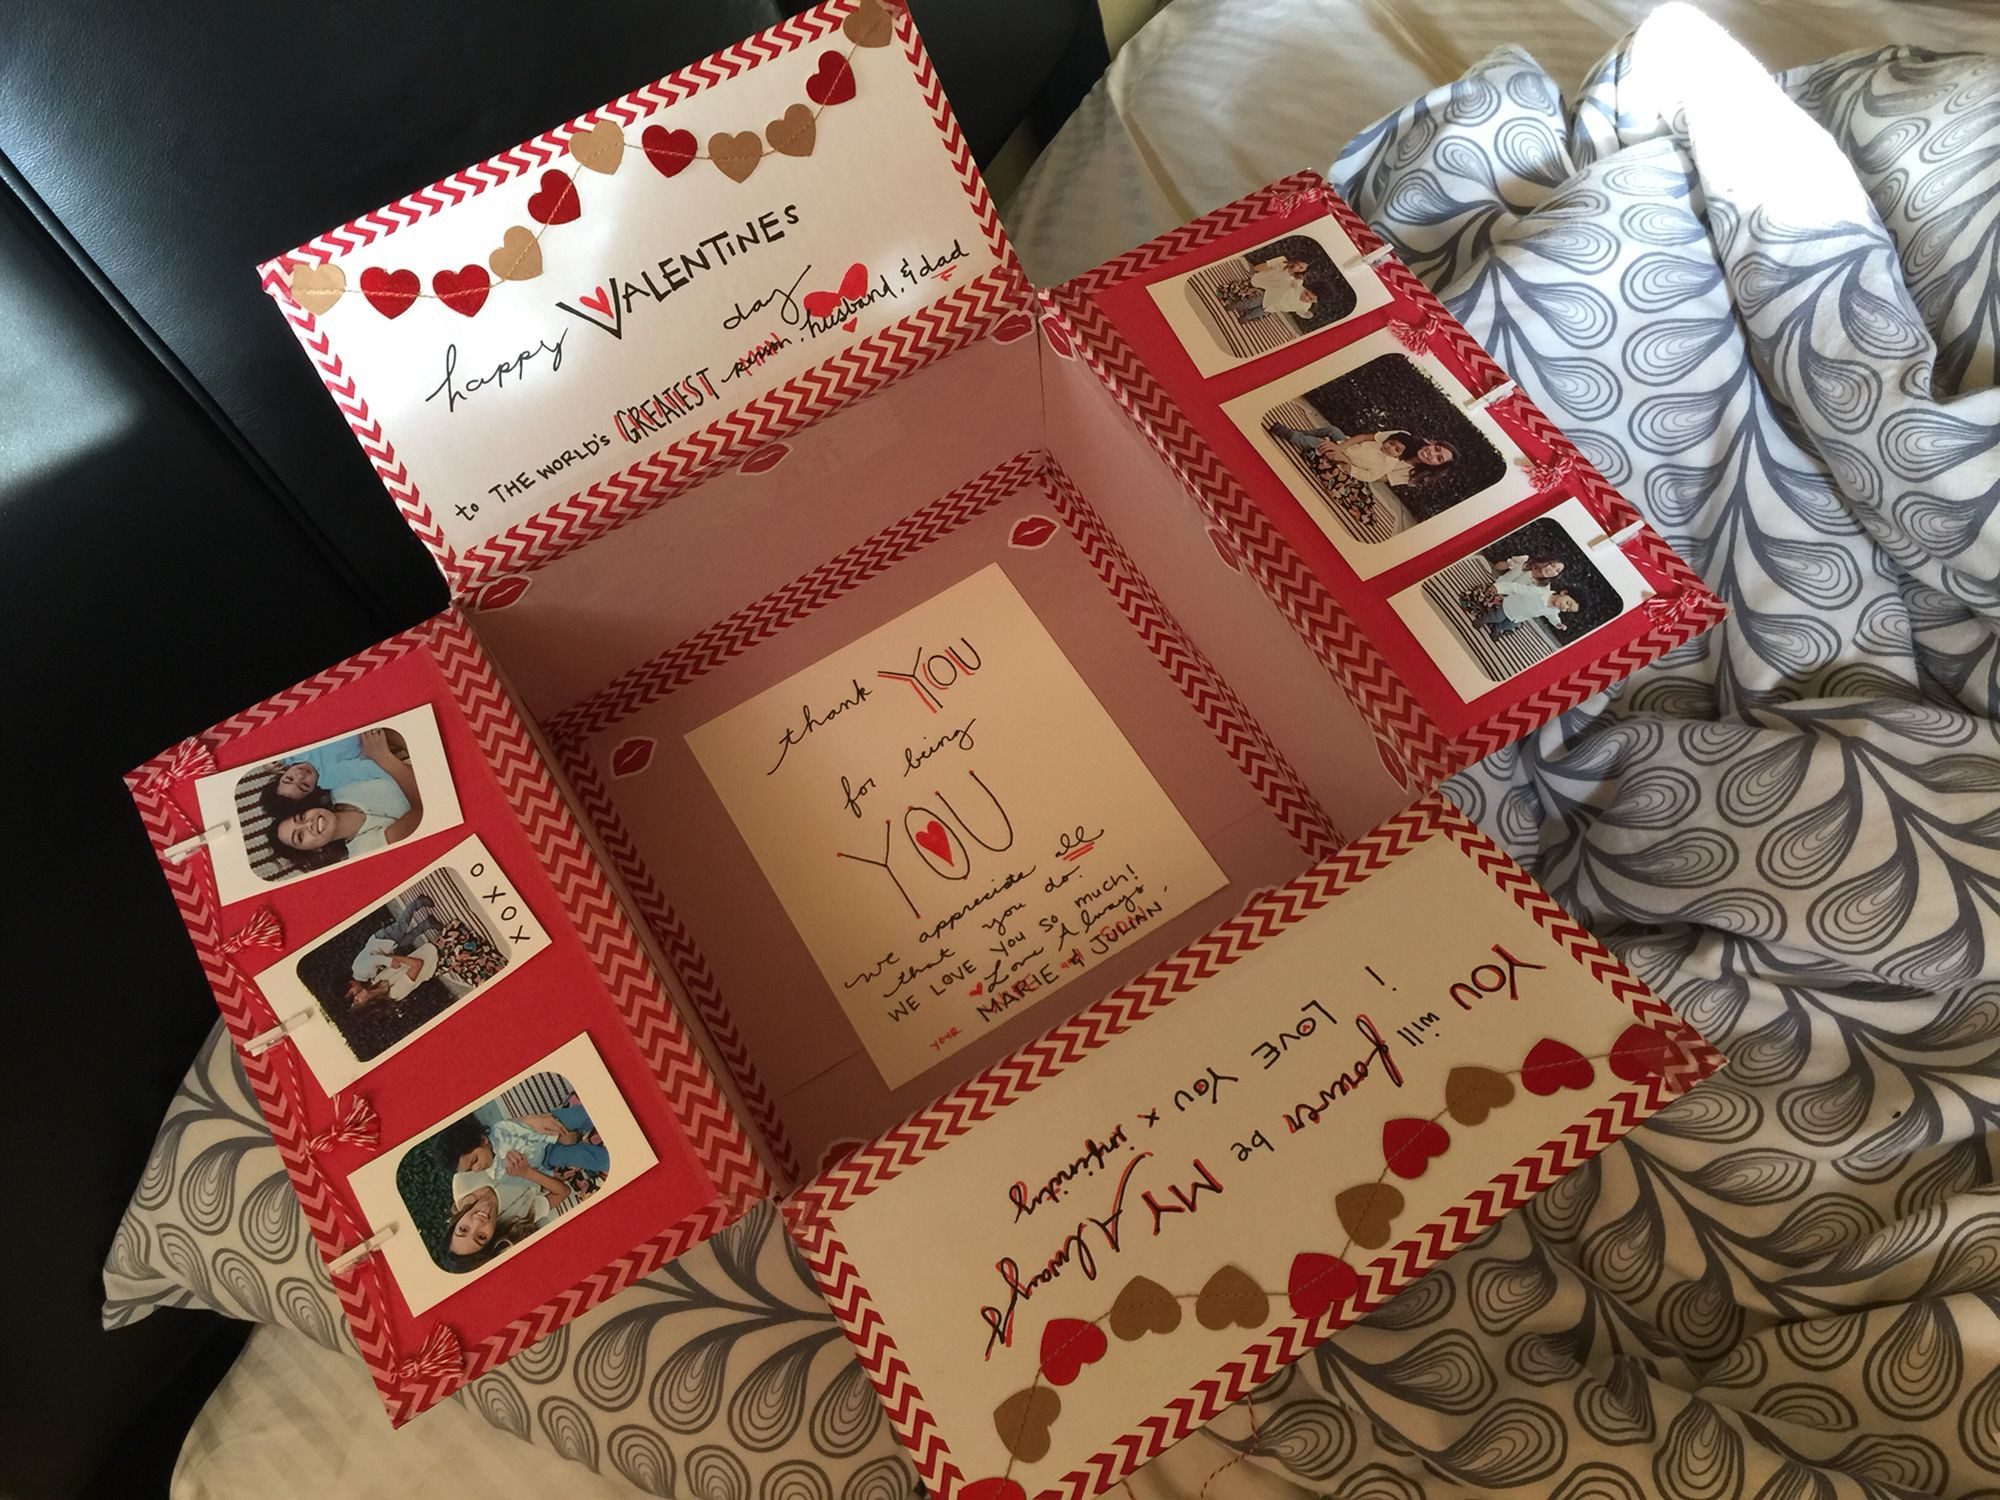 Valentines Day Gift Ideas For My Husband
 Spruced up a large USPS priority box for my husbands